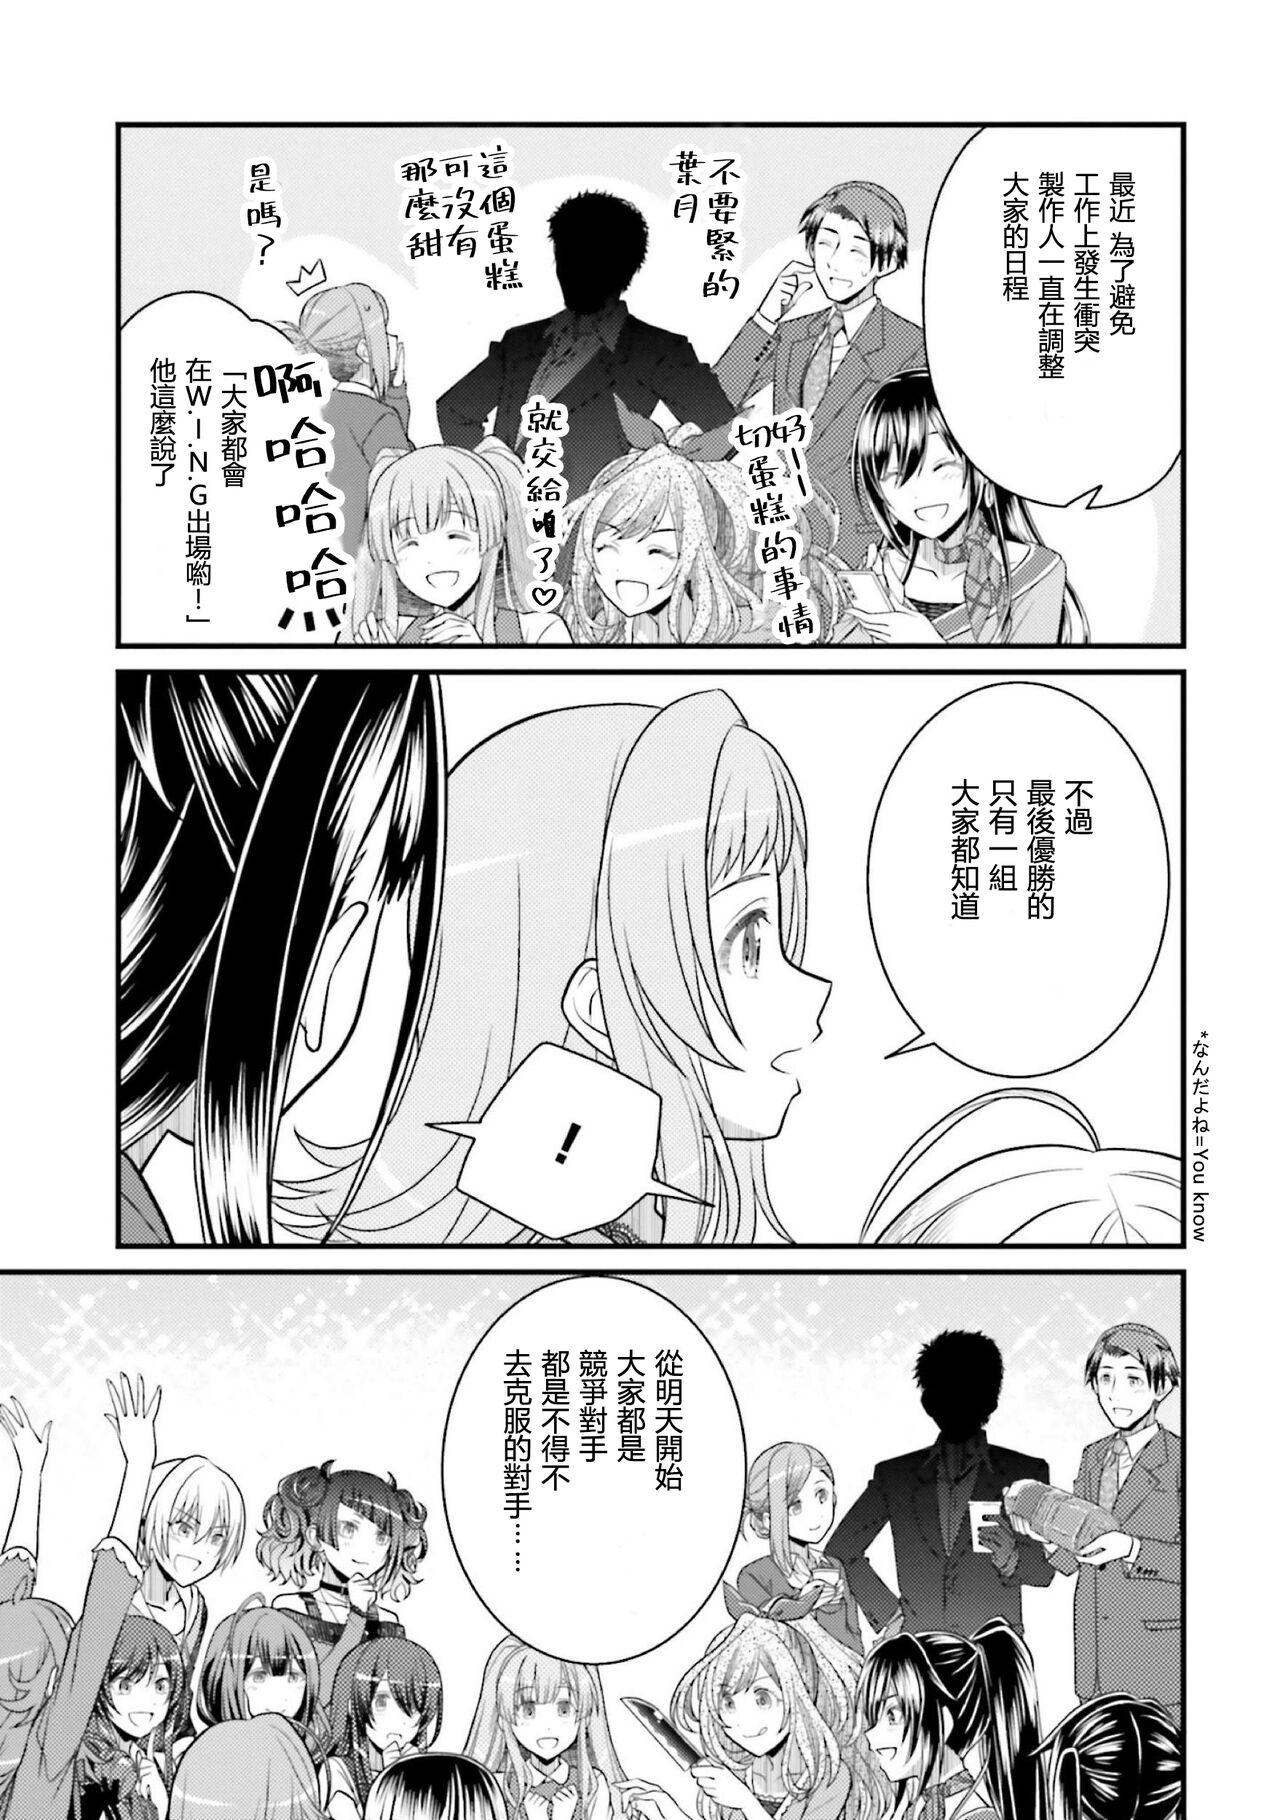 THE IDOLM@STER SHINYCOLORS 17話 4